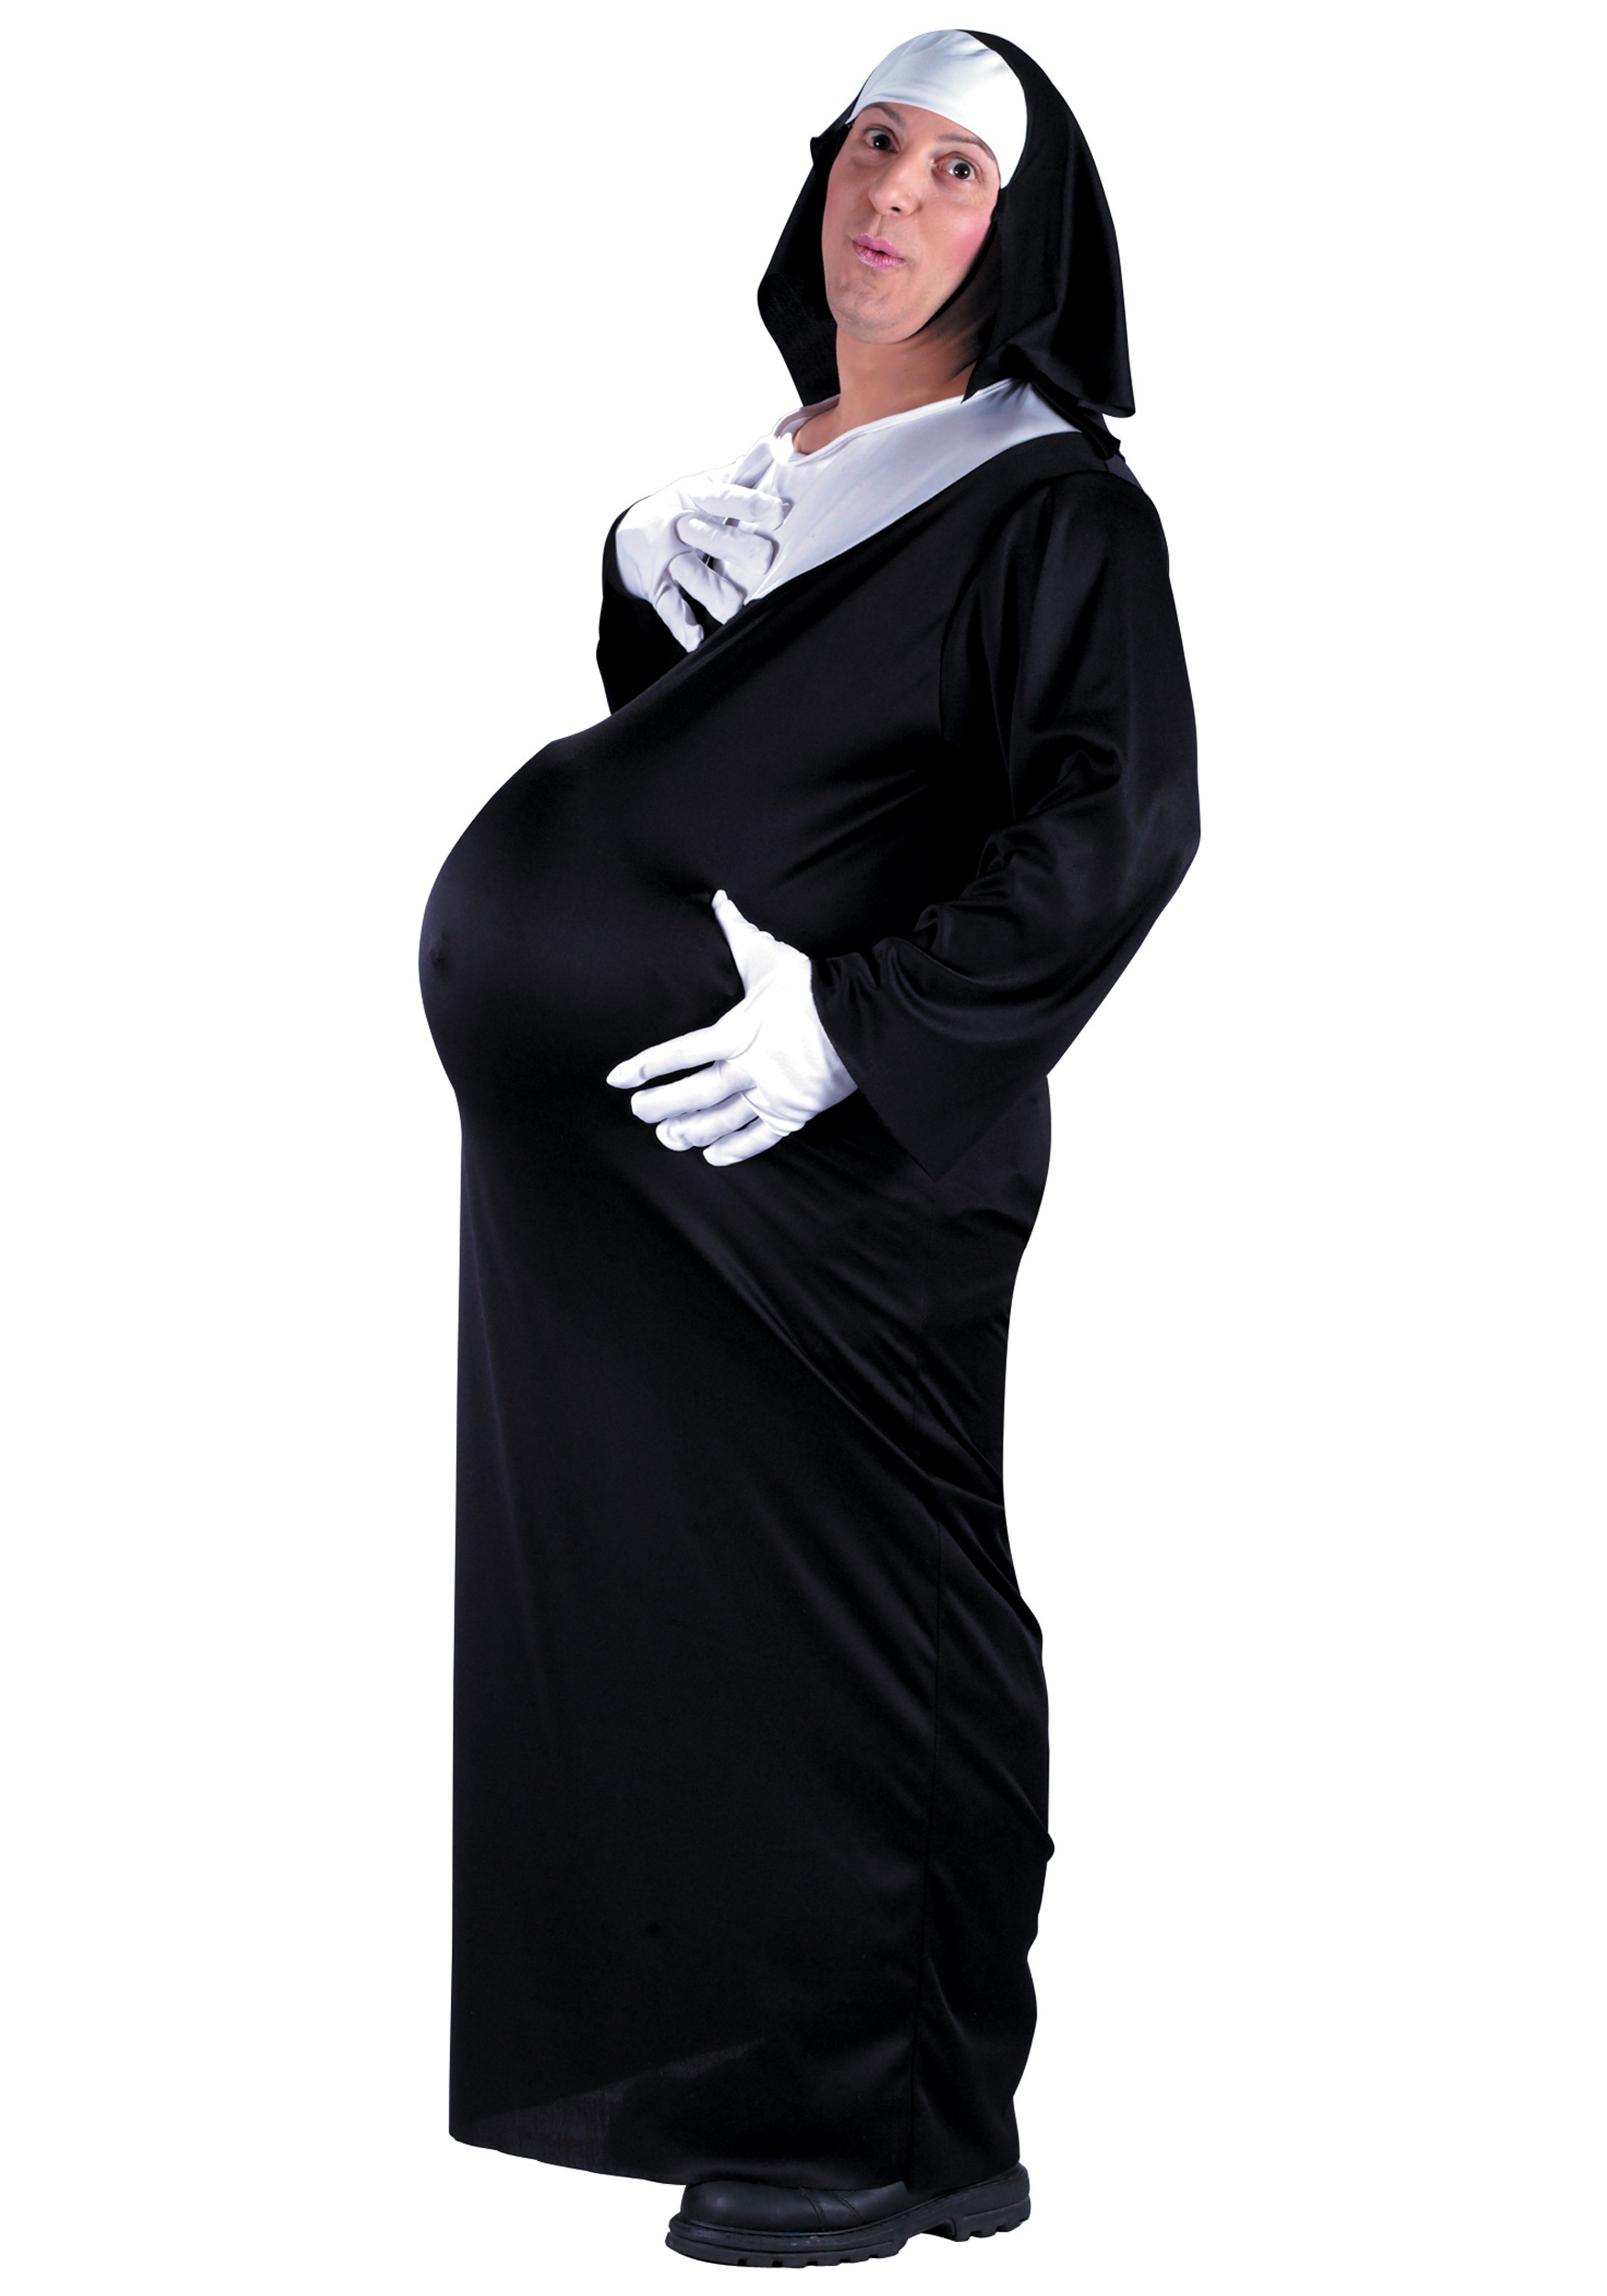 funny priest and nun costumes naked video pics